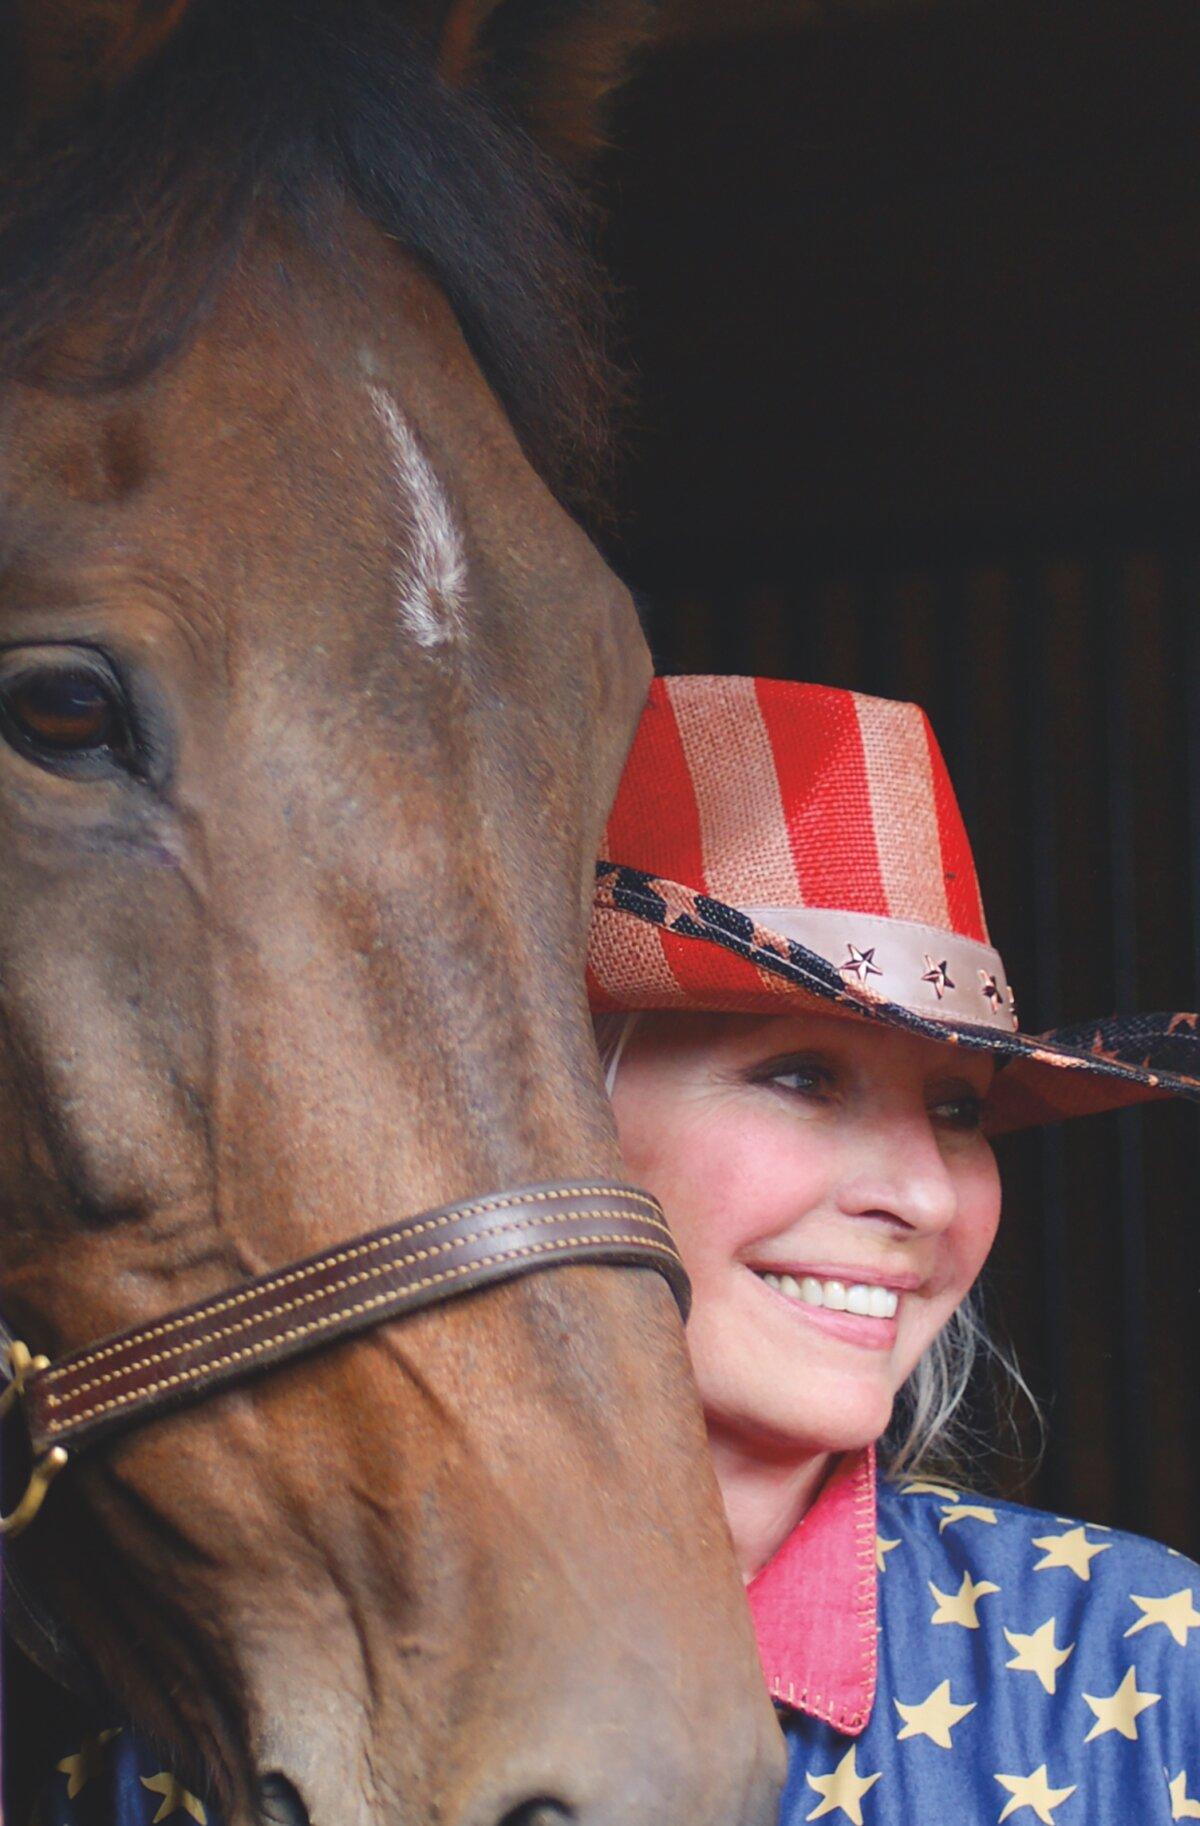 Jennifer O’Neill has a lifelong love for horses, which eventually inspired her to set up a ranch for equine therapy. (Courtesy of Jennifer OʼNeill)